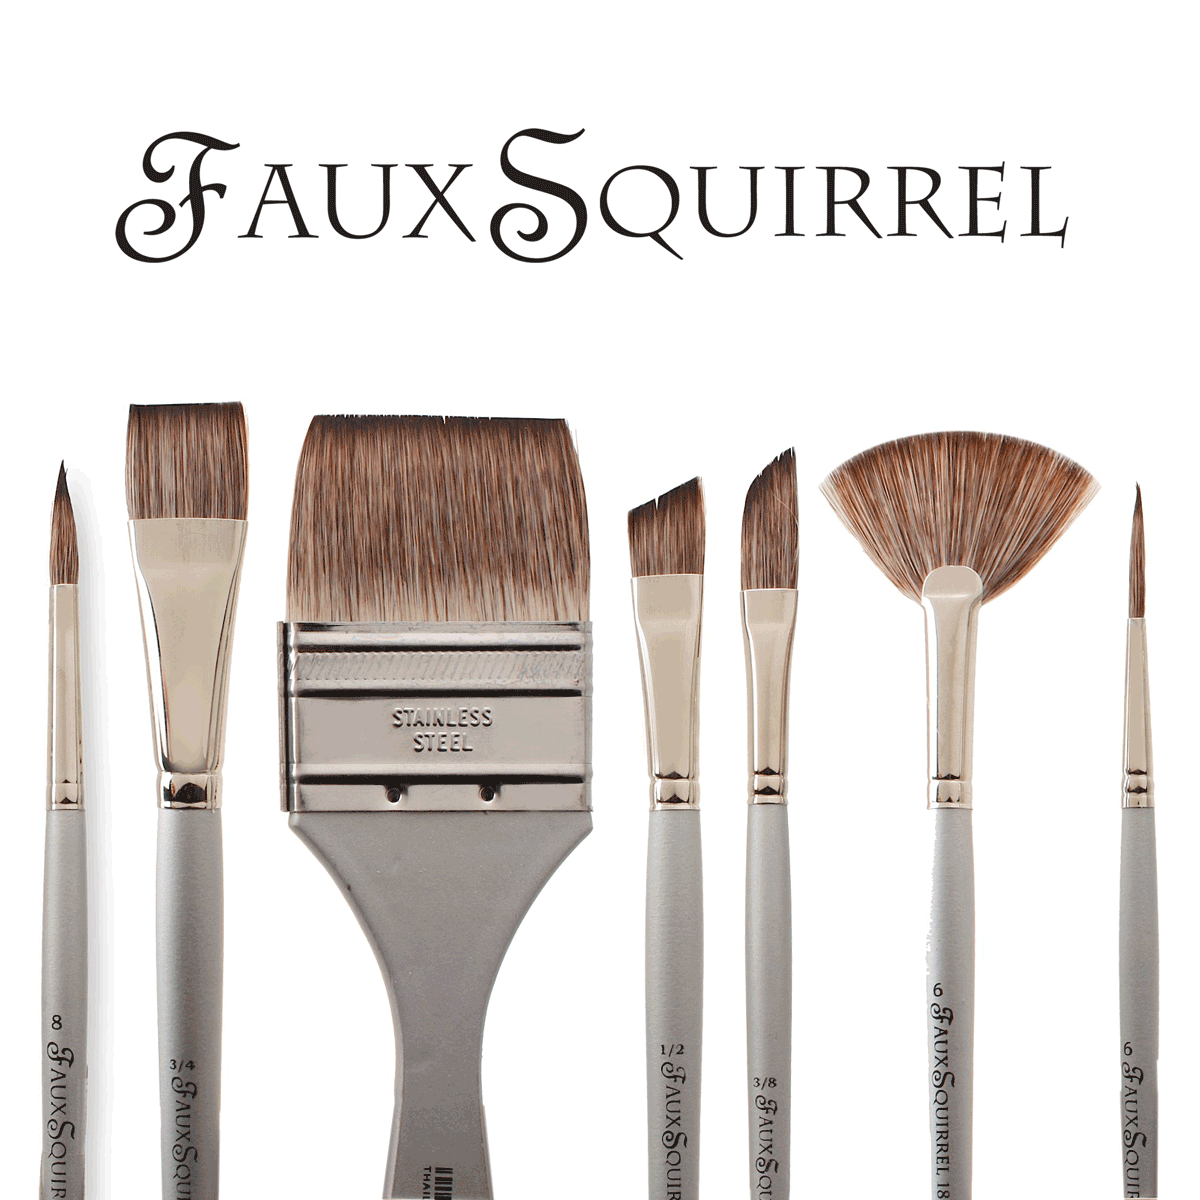 Dynasty Faux Squirrel Assorted Brush Series 1827